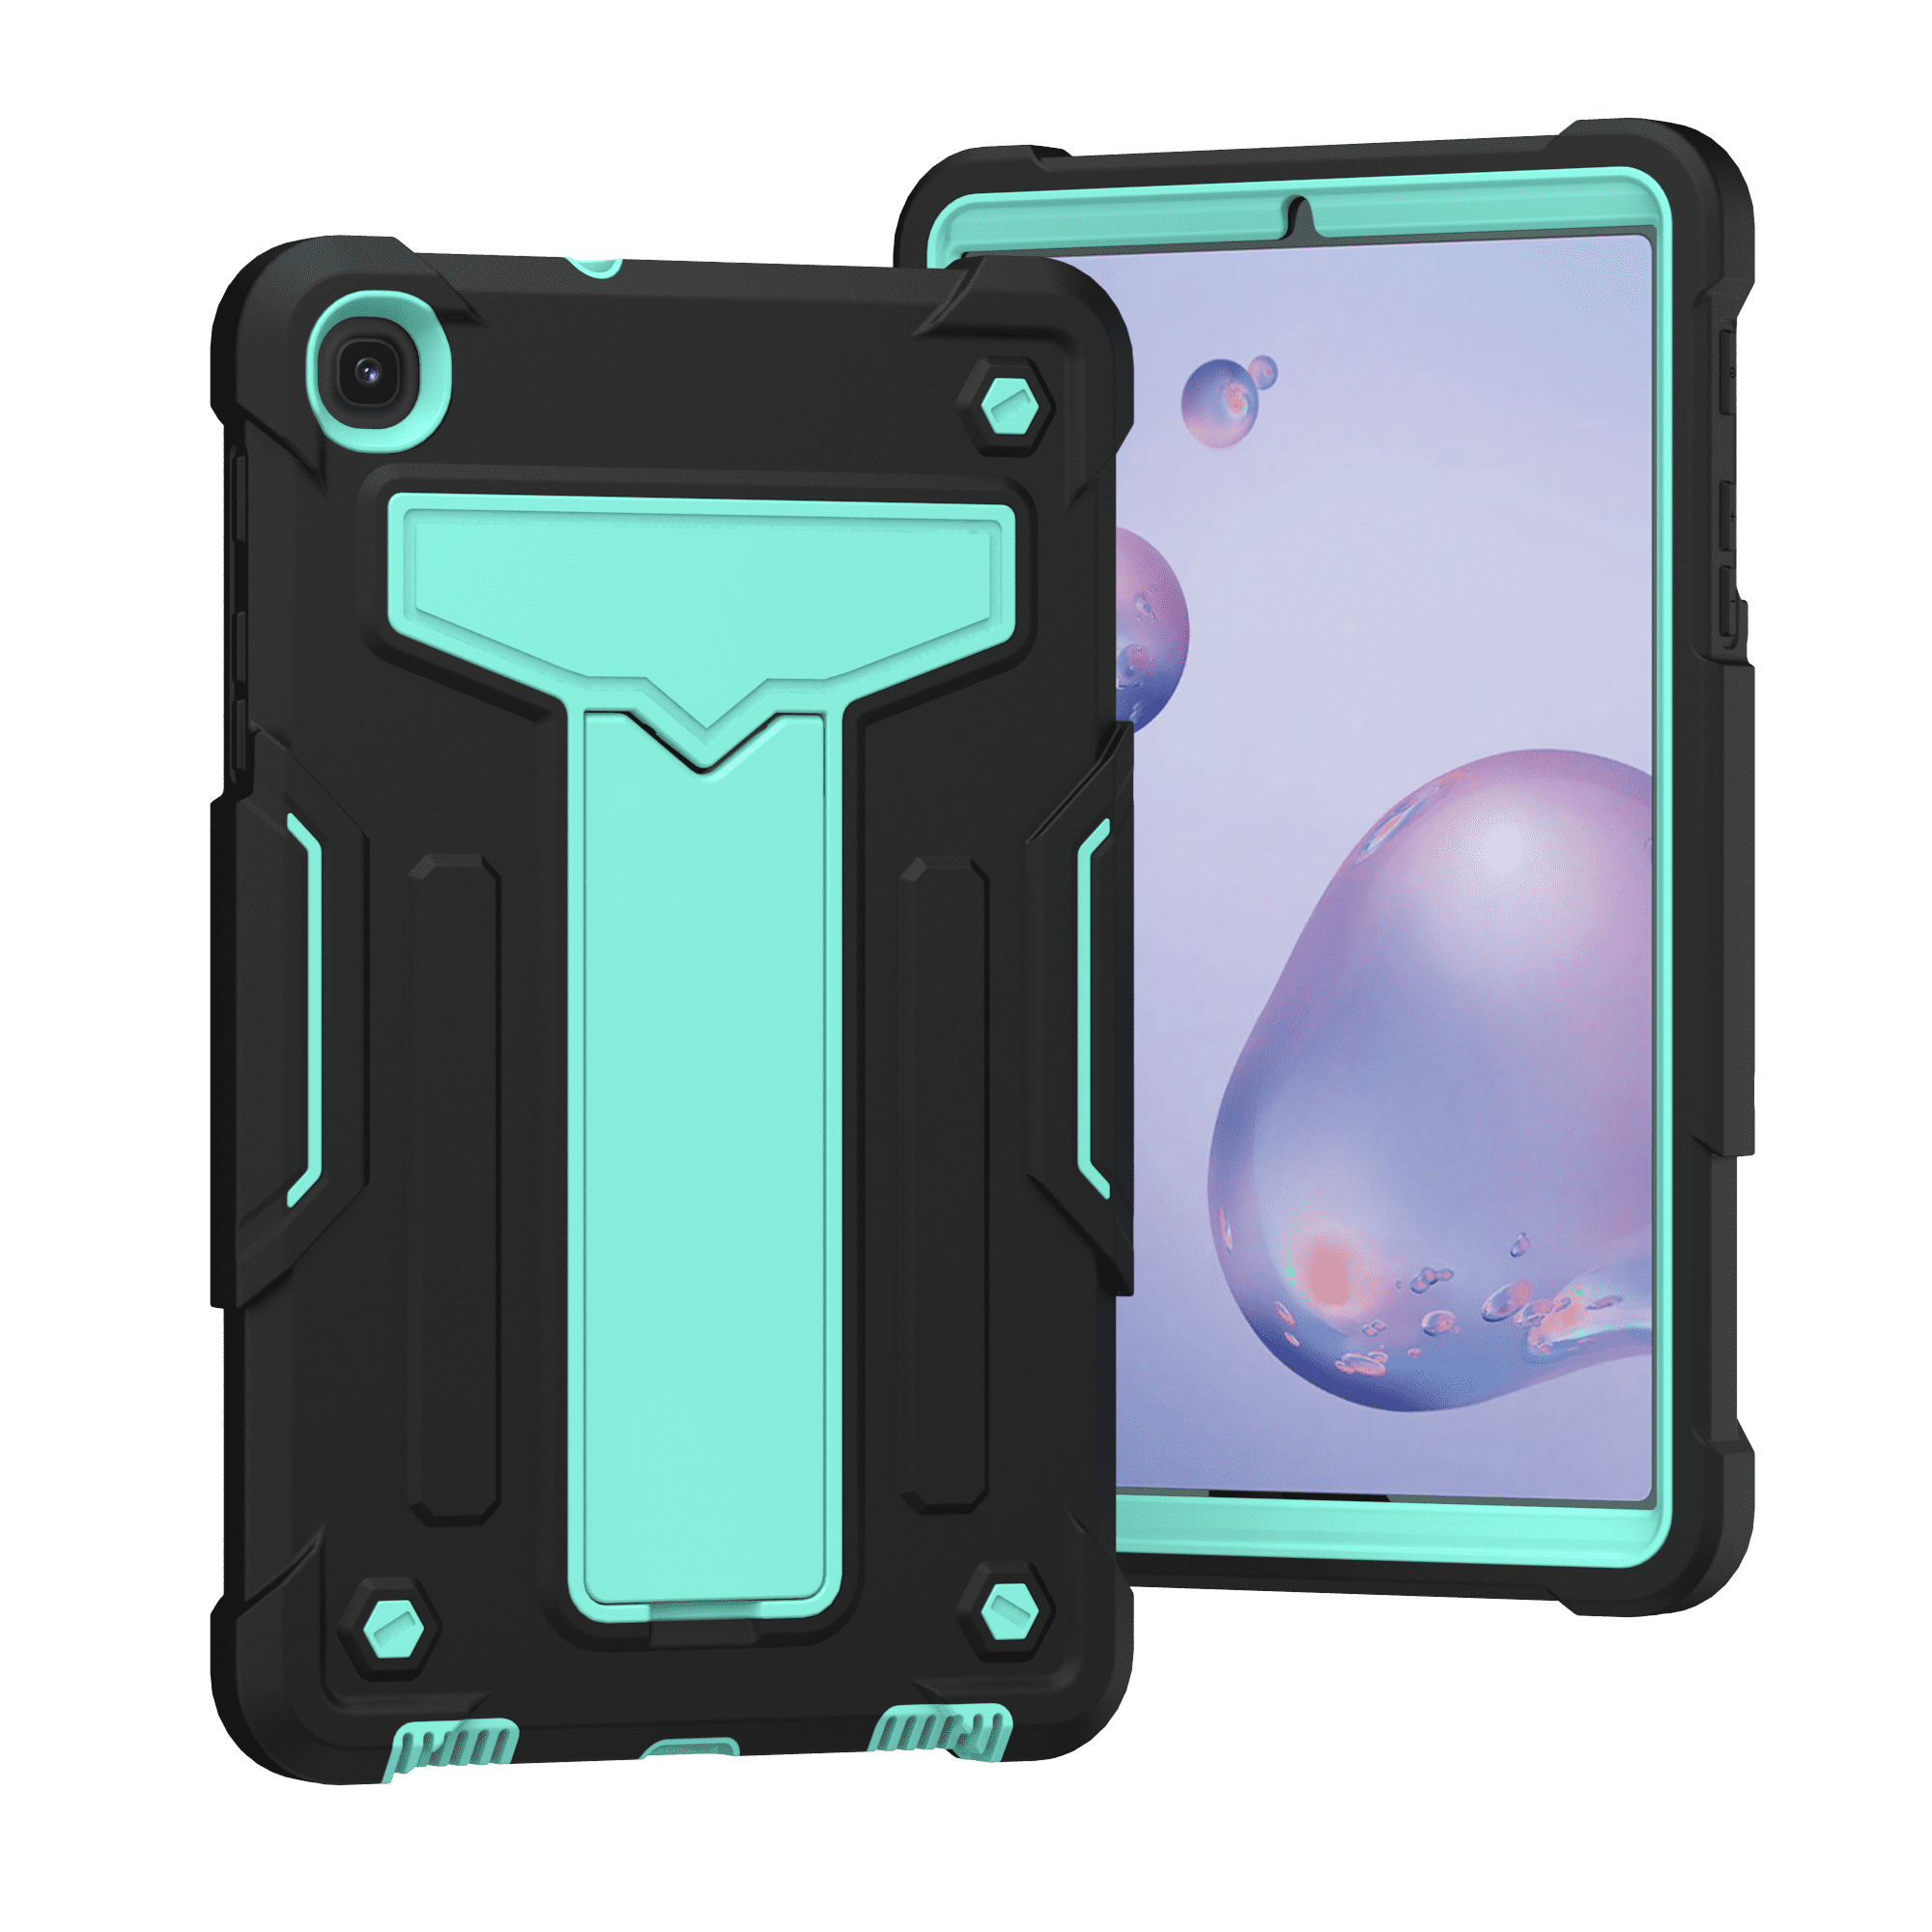 SkyBlue SIBEITU SM-T307/SM-T307U Case with Screen Protector Pencil Holder Samsung Galaxy Tab A 8.4 Case for Kids Full-Body Rugged Heavy Duty Cover w/ Stand Shoulder Strap for Kids